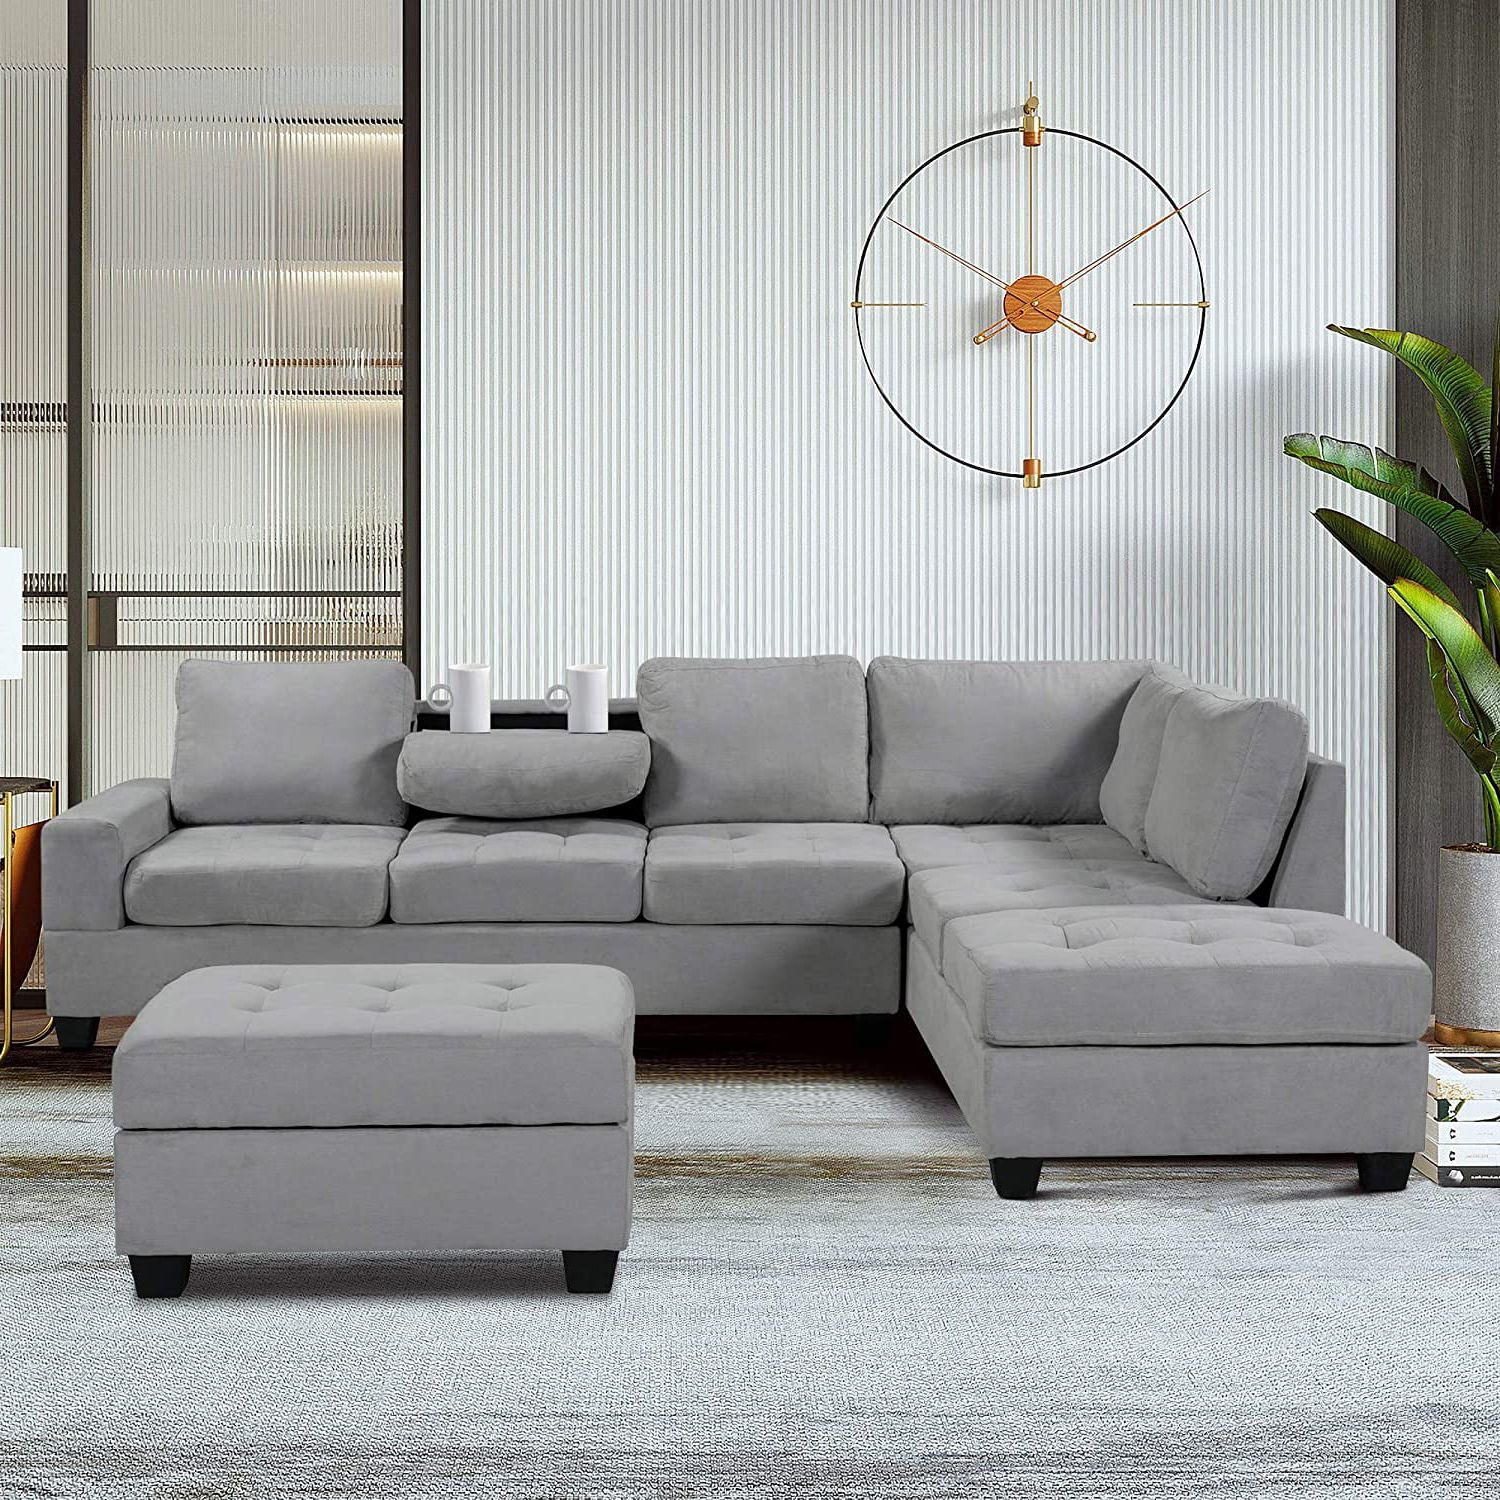 3 Piece Convertible Sectional Sofa L Shaped Couch With Reversible Inside L Shape Couches With Reversible Chaises (Gallery 1 of 20)